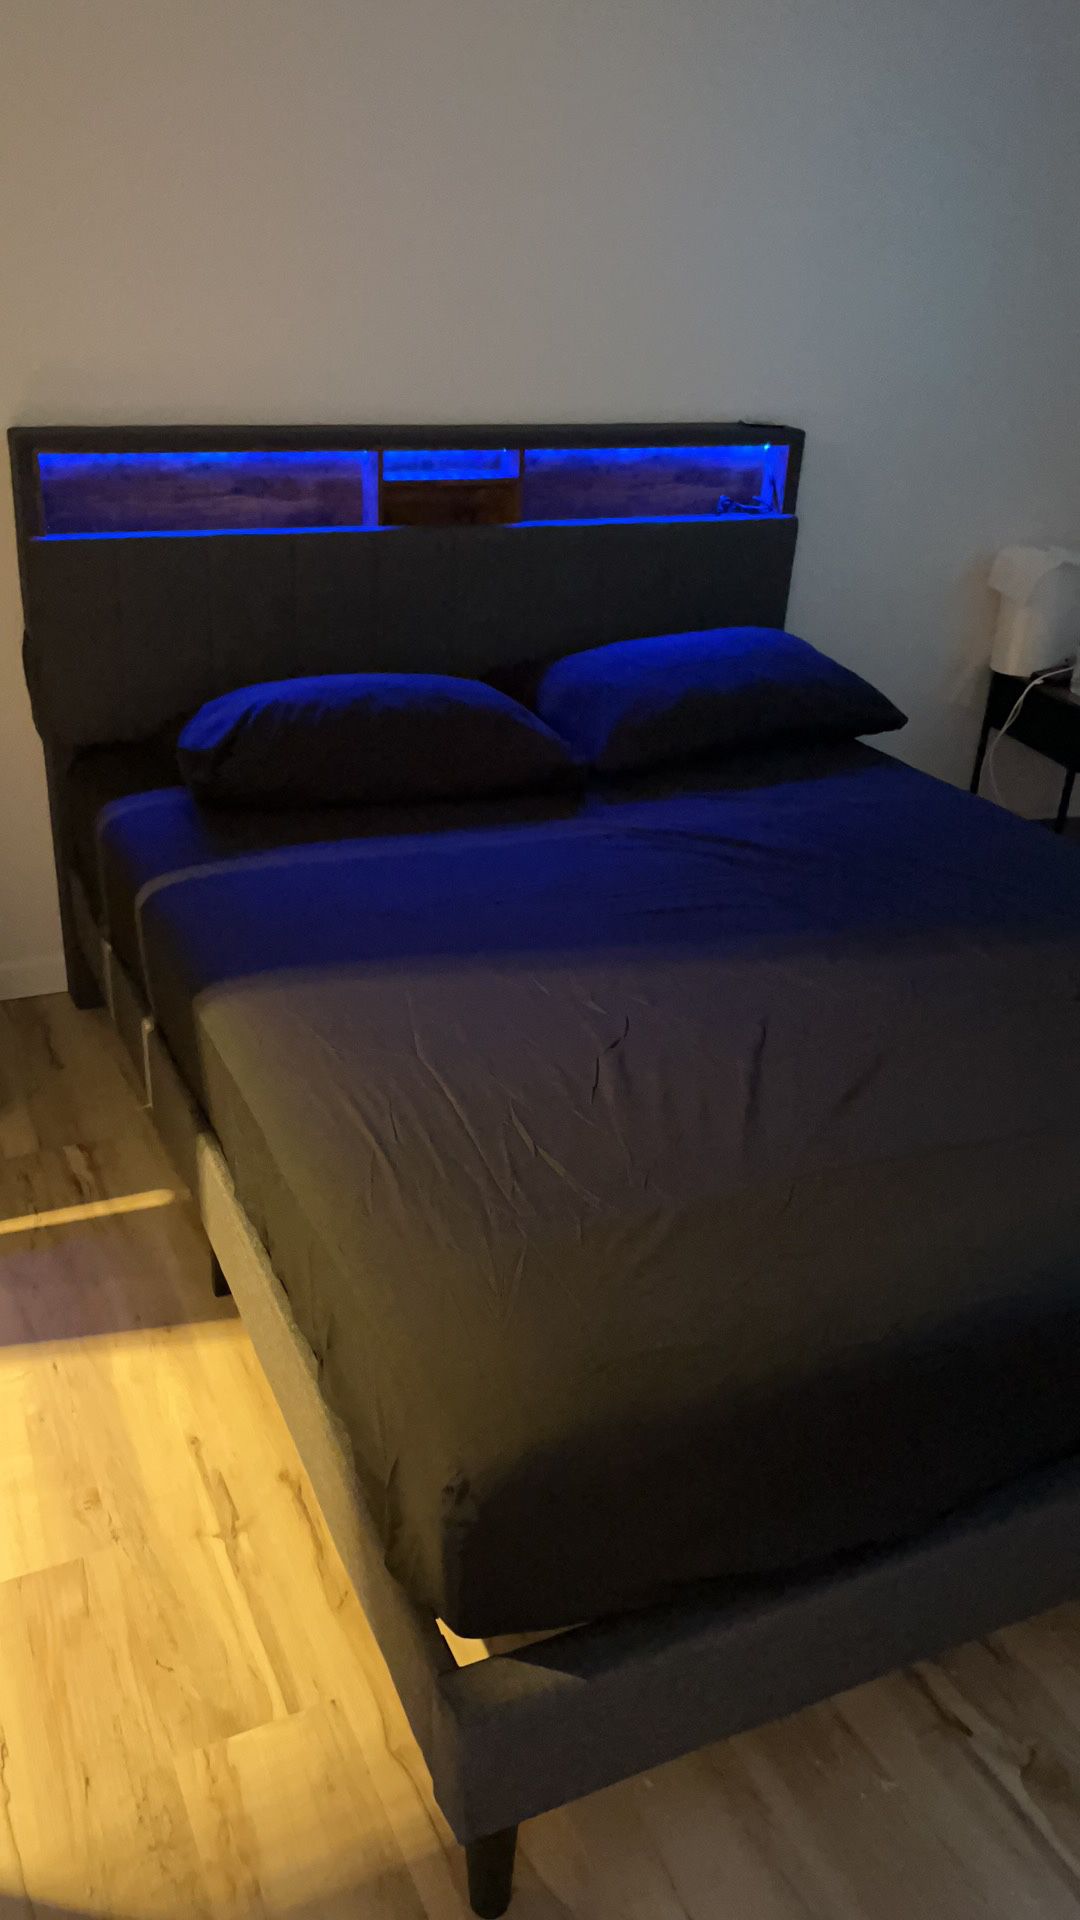 A Bed With IKEA Mattress 